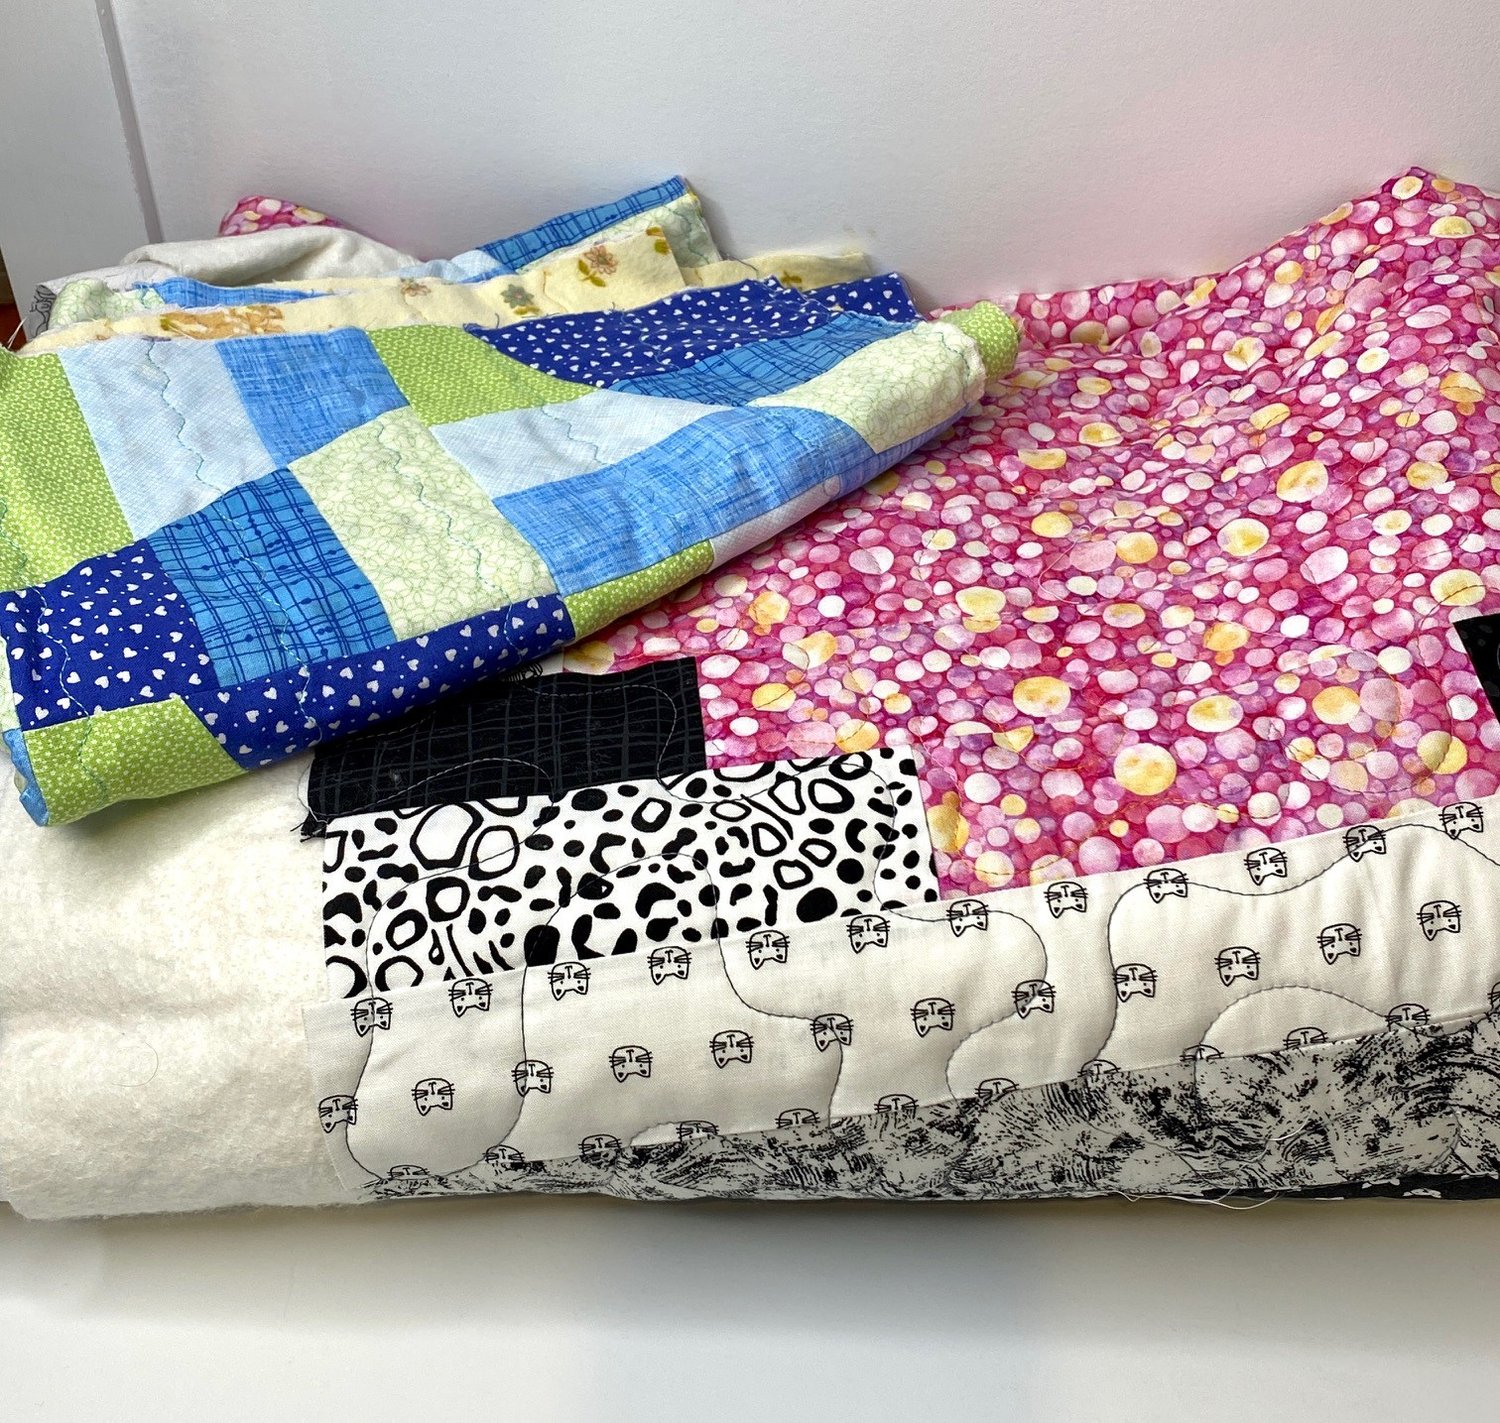 A sample selection of my Unfinished quilts pile.